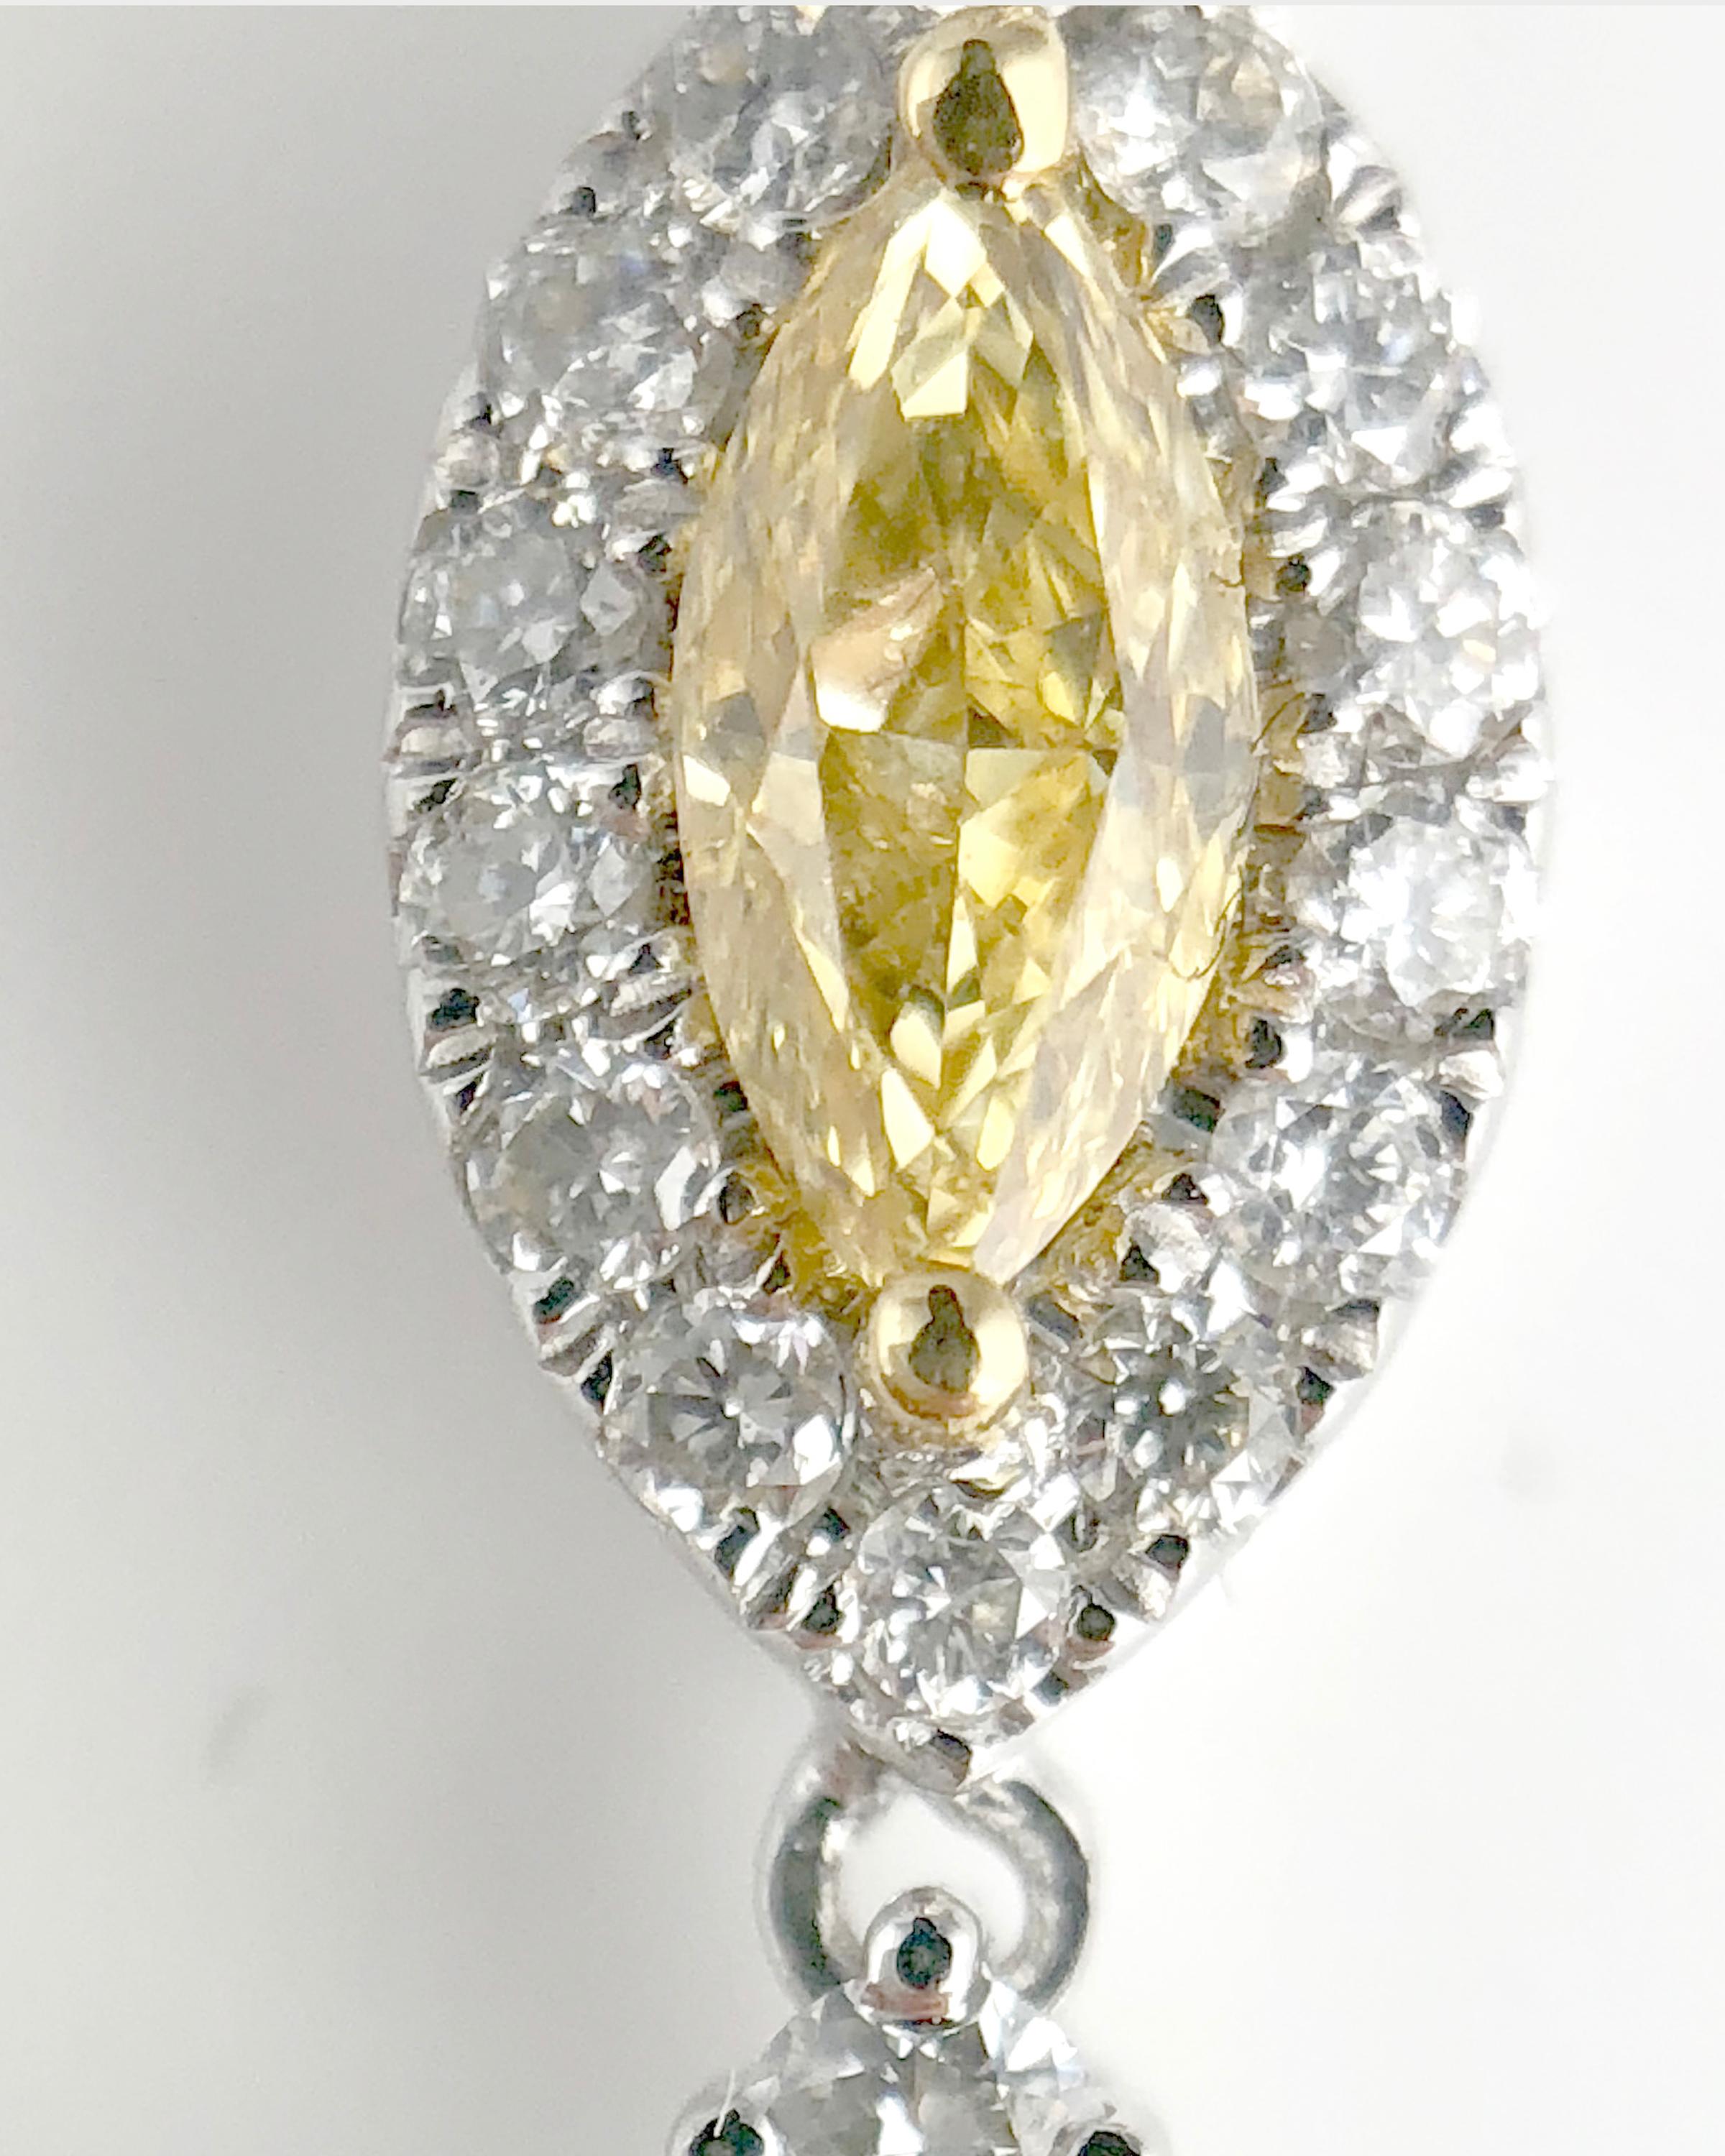 (DiamondTown) This beautiful pendant features three GIA-certified marquise cut natural color stones, each wrapped in halos of round white diamonds. The pendant is set in 18k White, Yellow, and Rose gold.

GIA Certified 0.10 Carat Fancy Intense